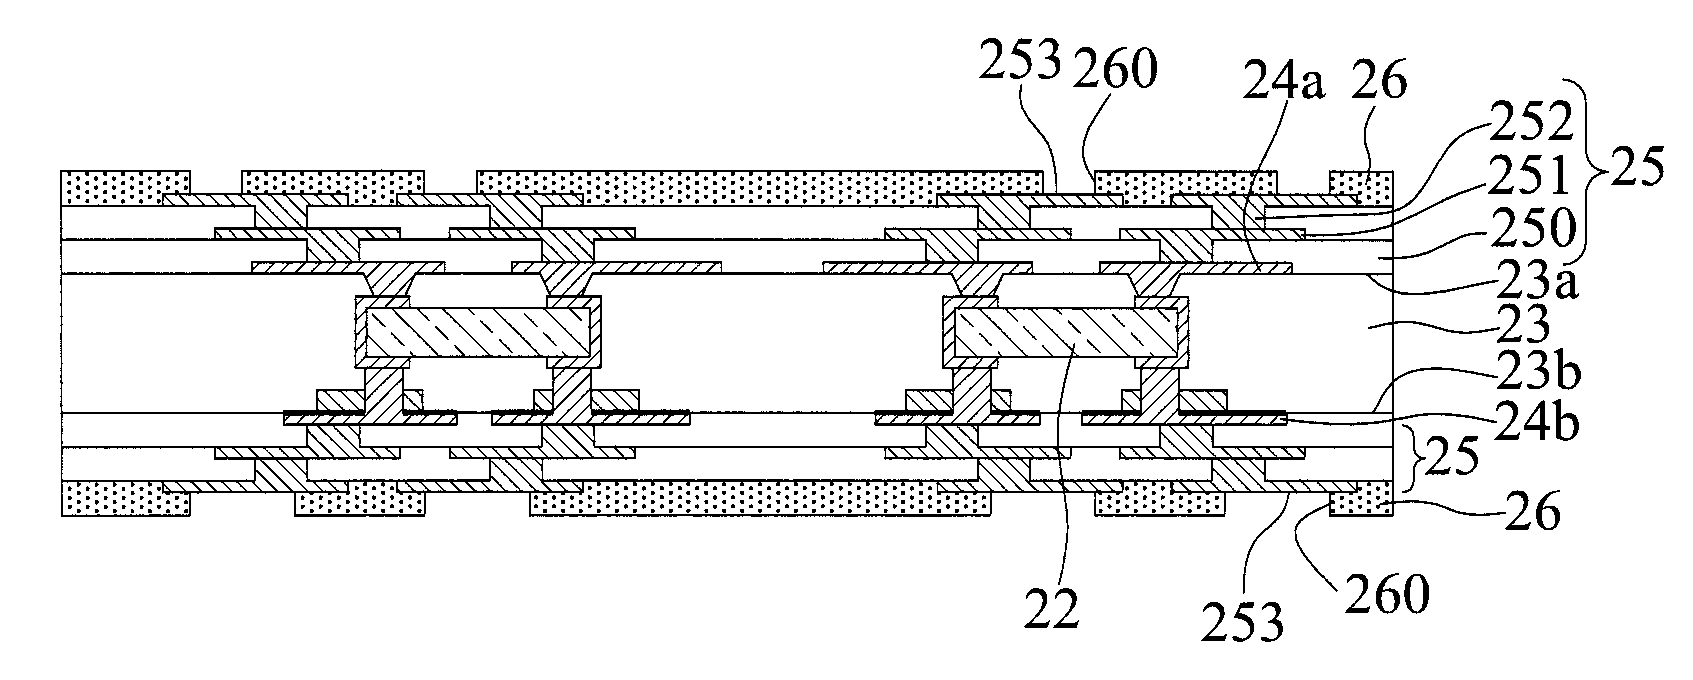 Packaging substrate having a passive element embedded therein and method of fabricating the same